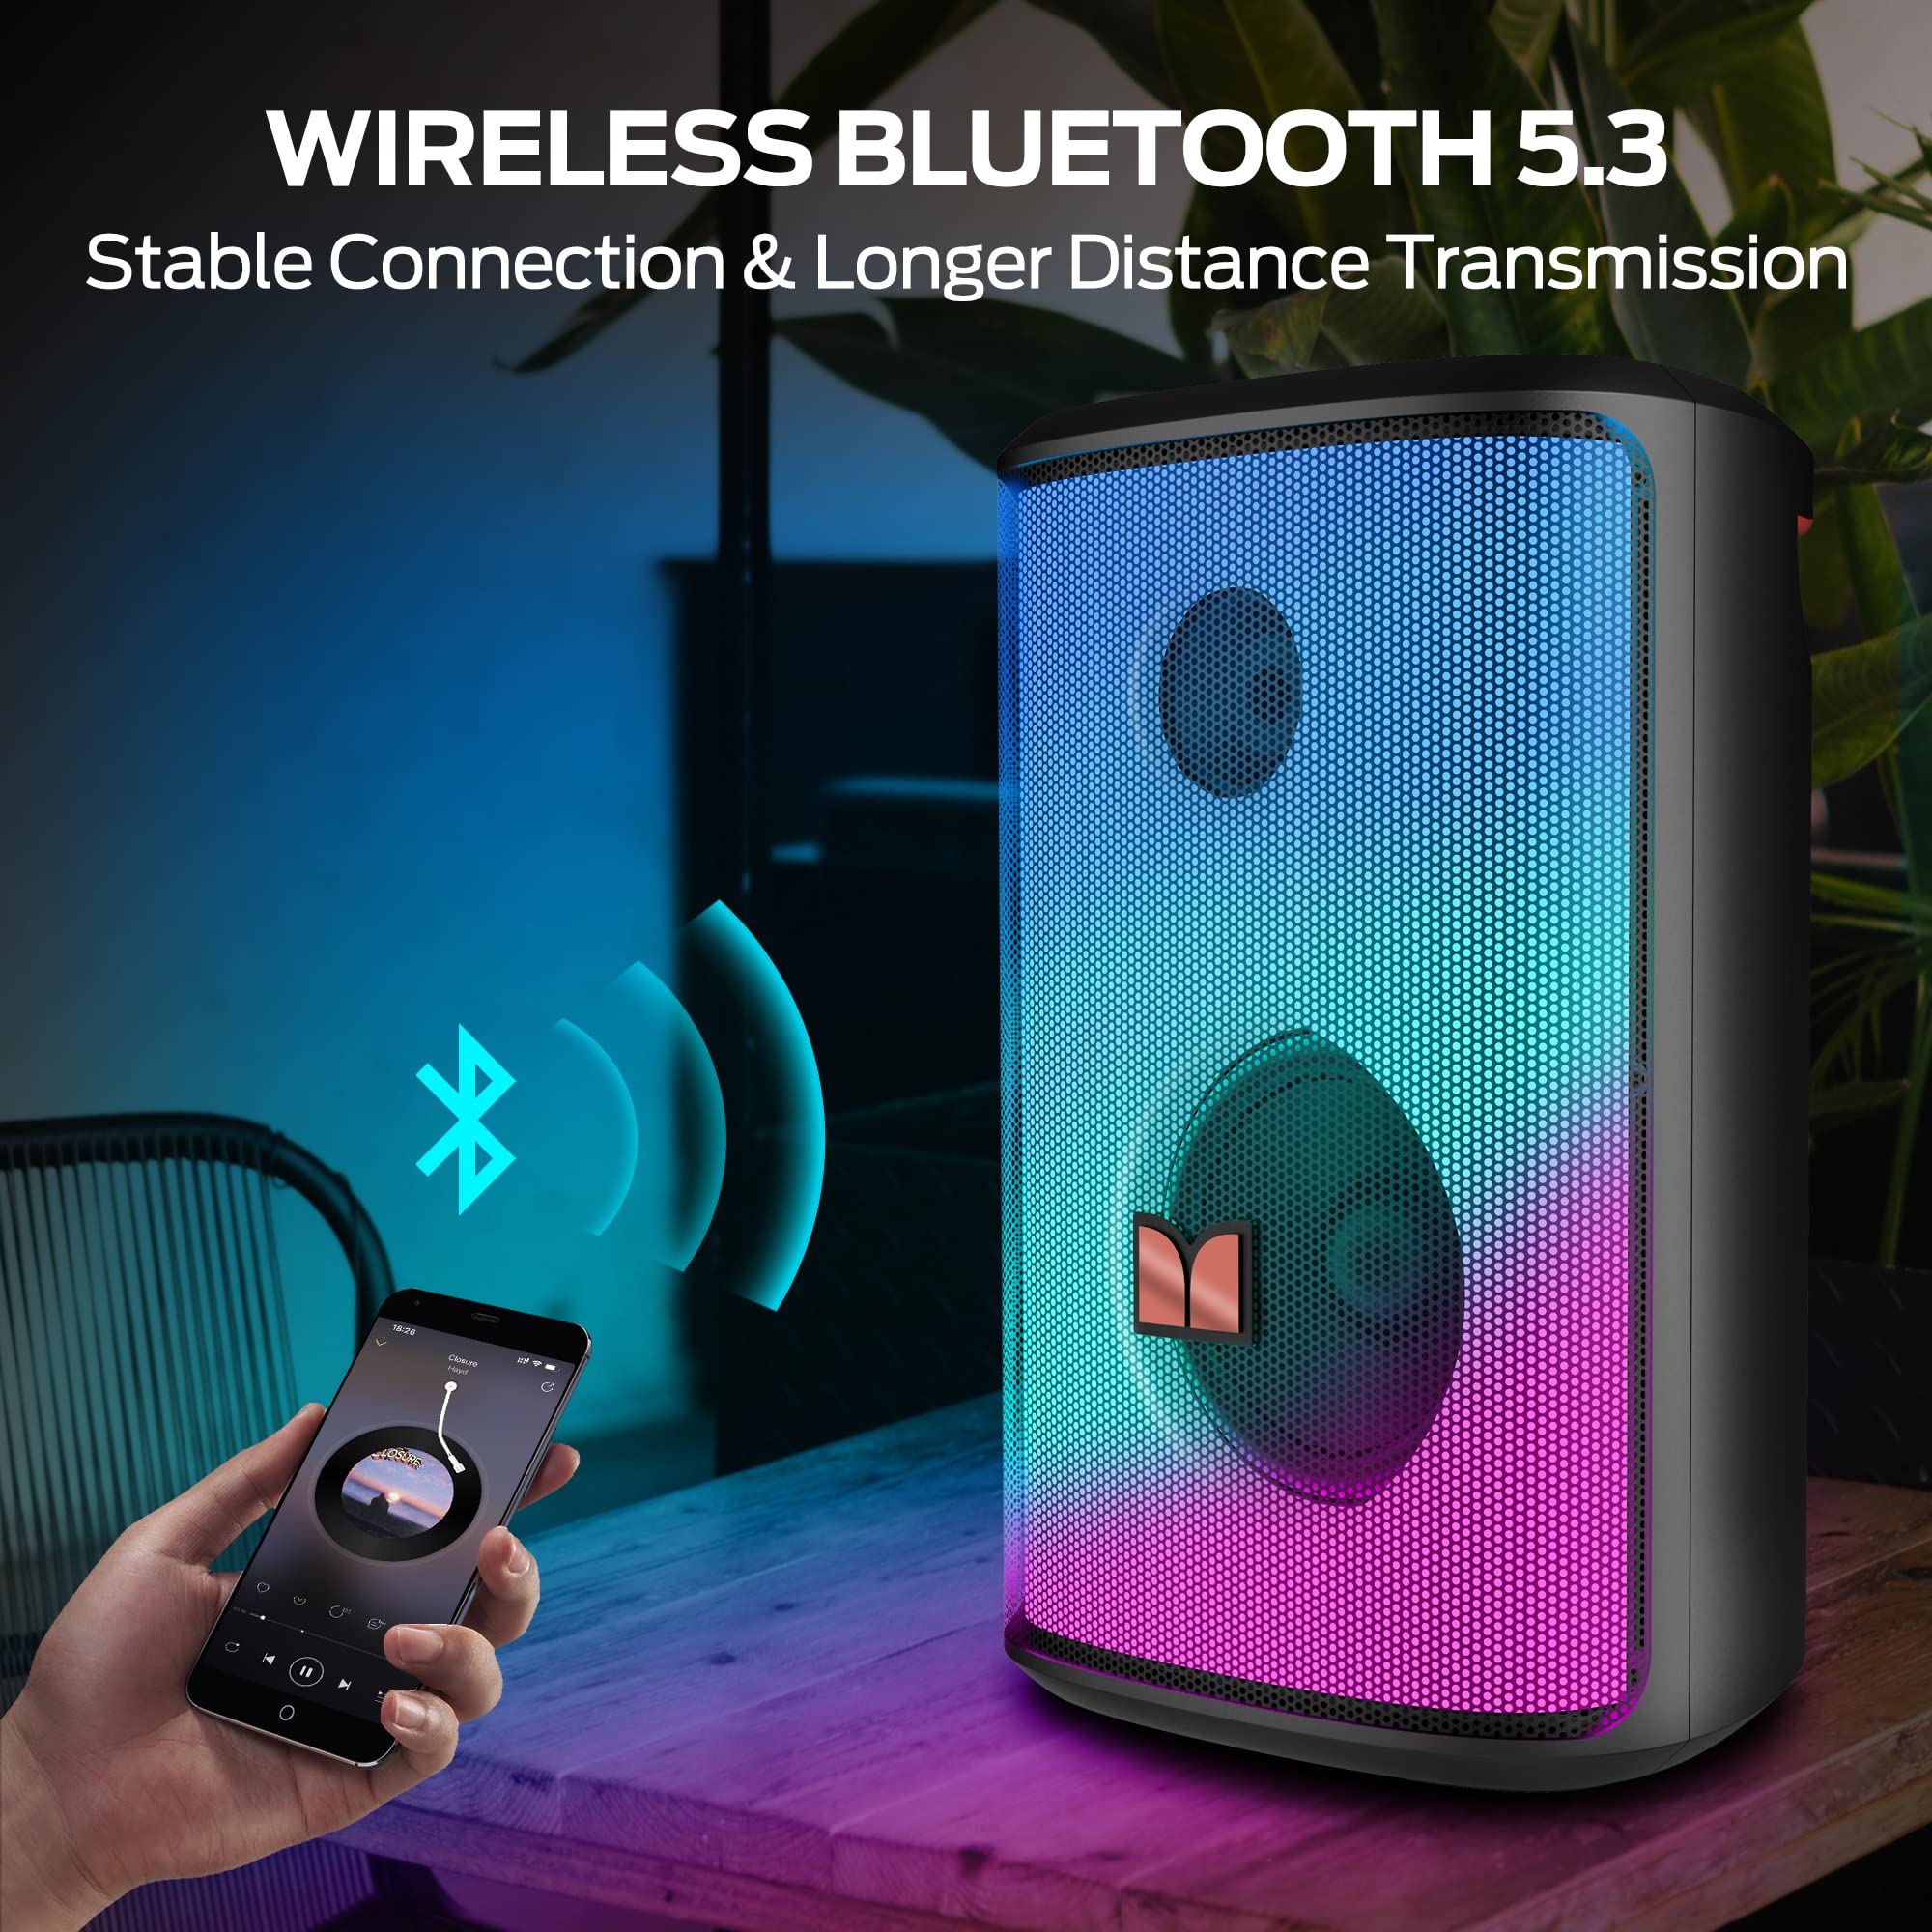 Monster Cable Monster Sparkle Party Speaker 80W, Speaker with Powerful Sound and Punchy Bass, Full Screen Colorful Lights, 24H Playtime, Bluet